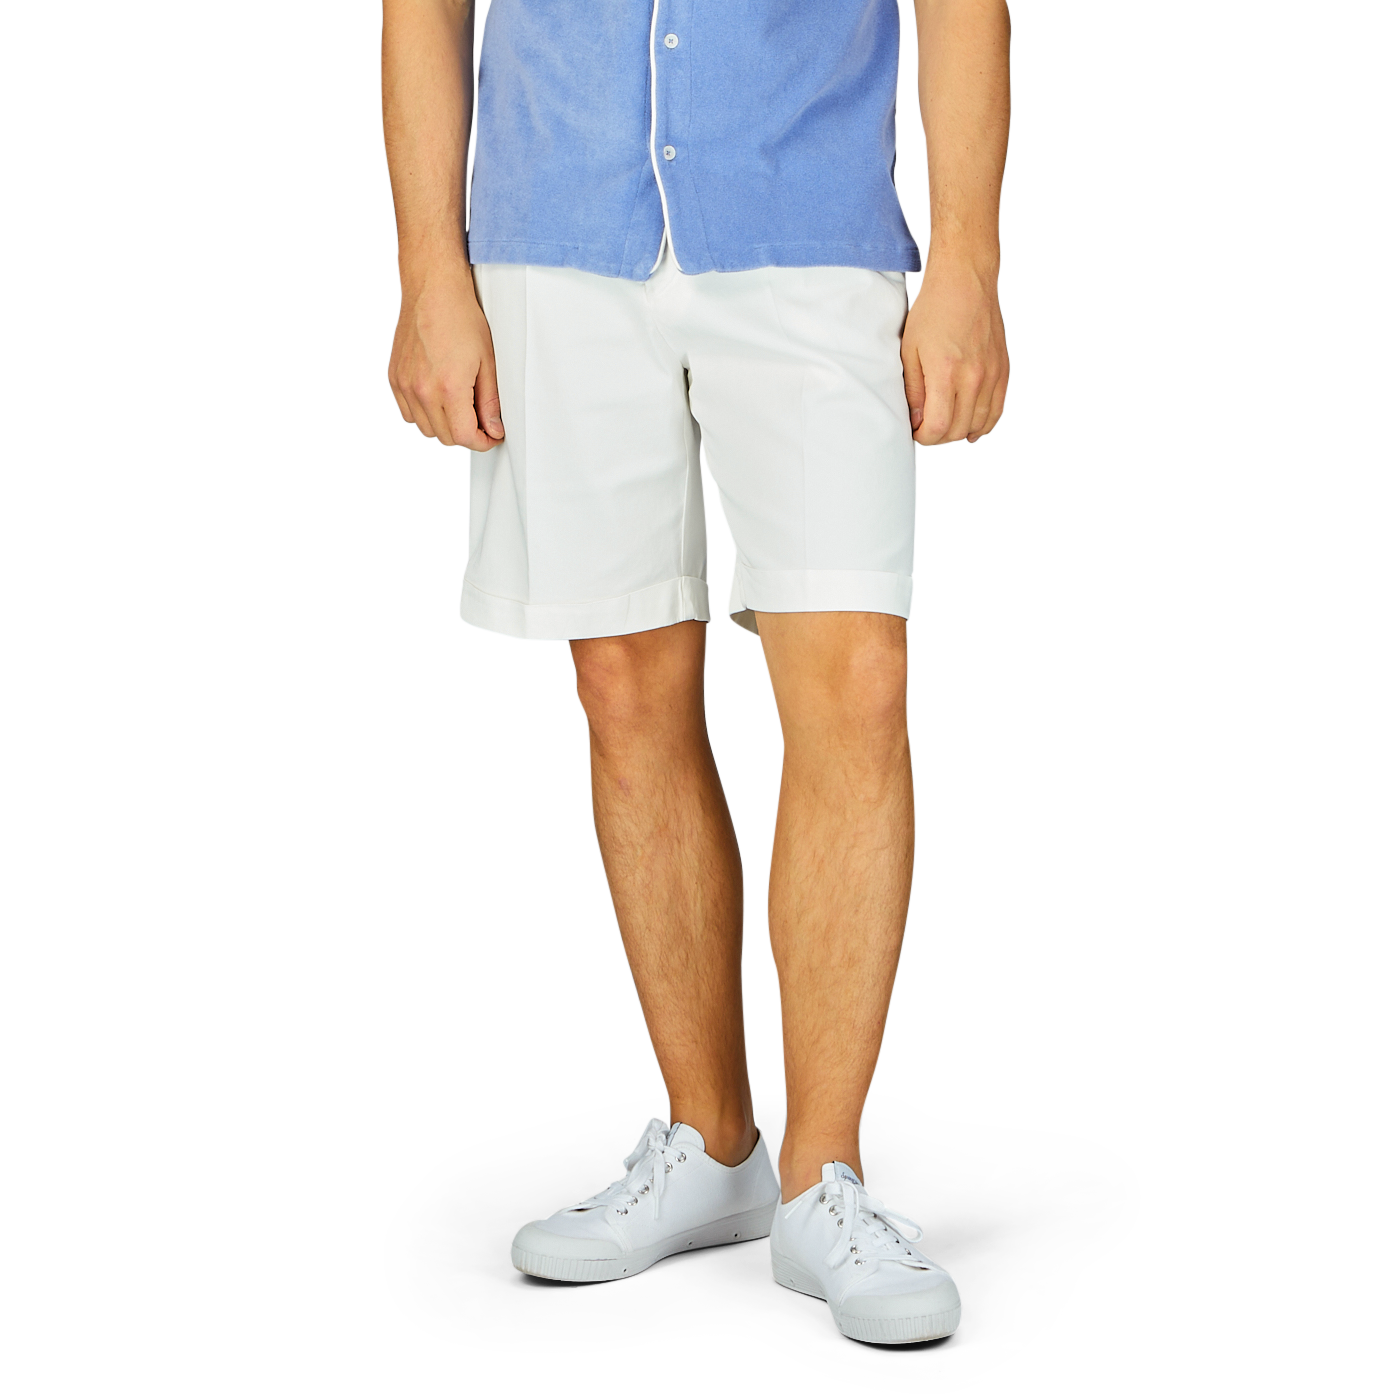 Man standing in blue shirt, Off-White Cotton Blend Pleated Shorts, and white sneakers.